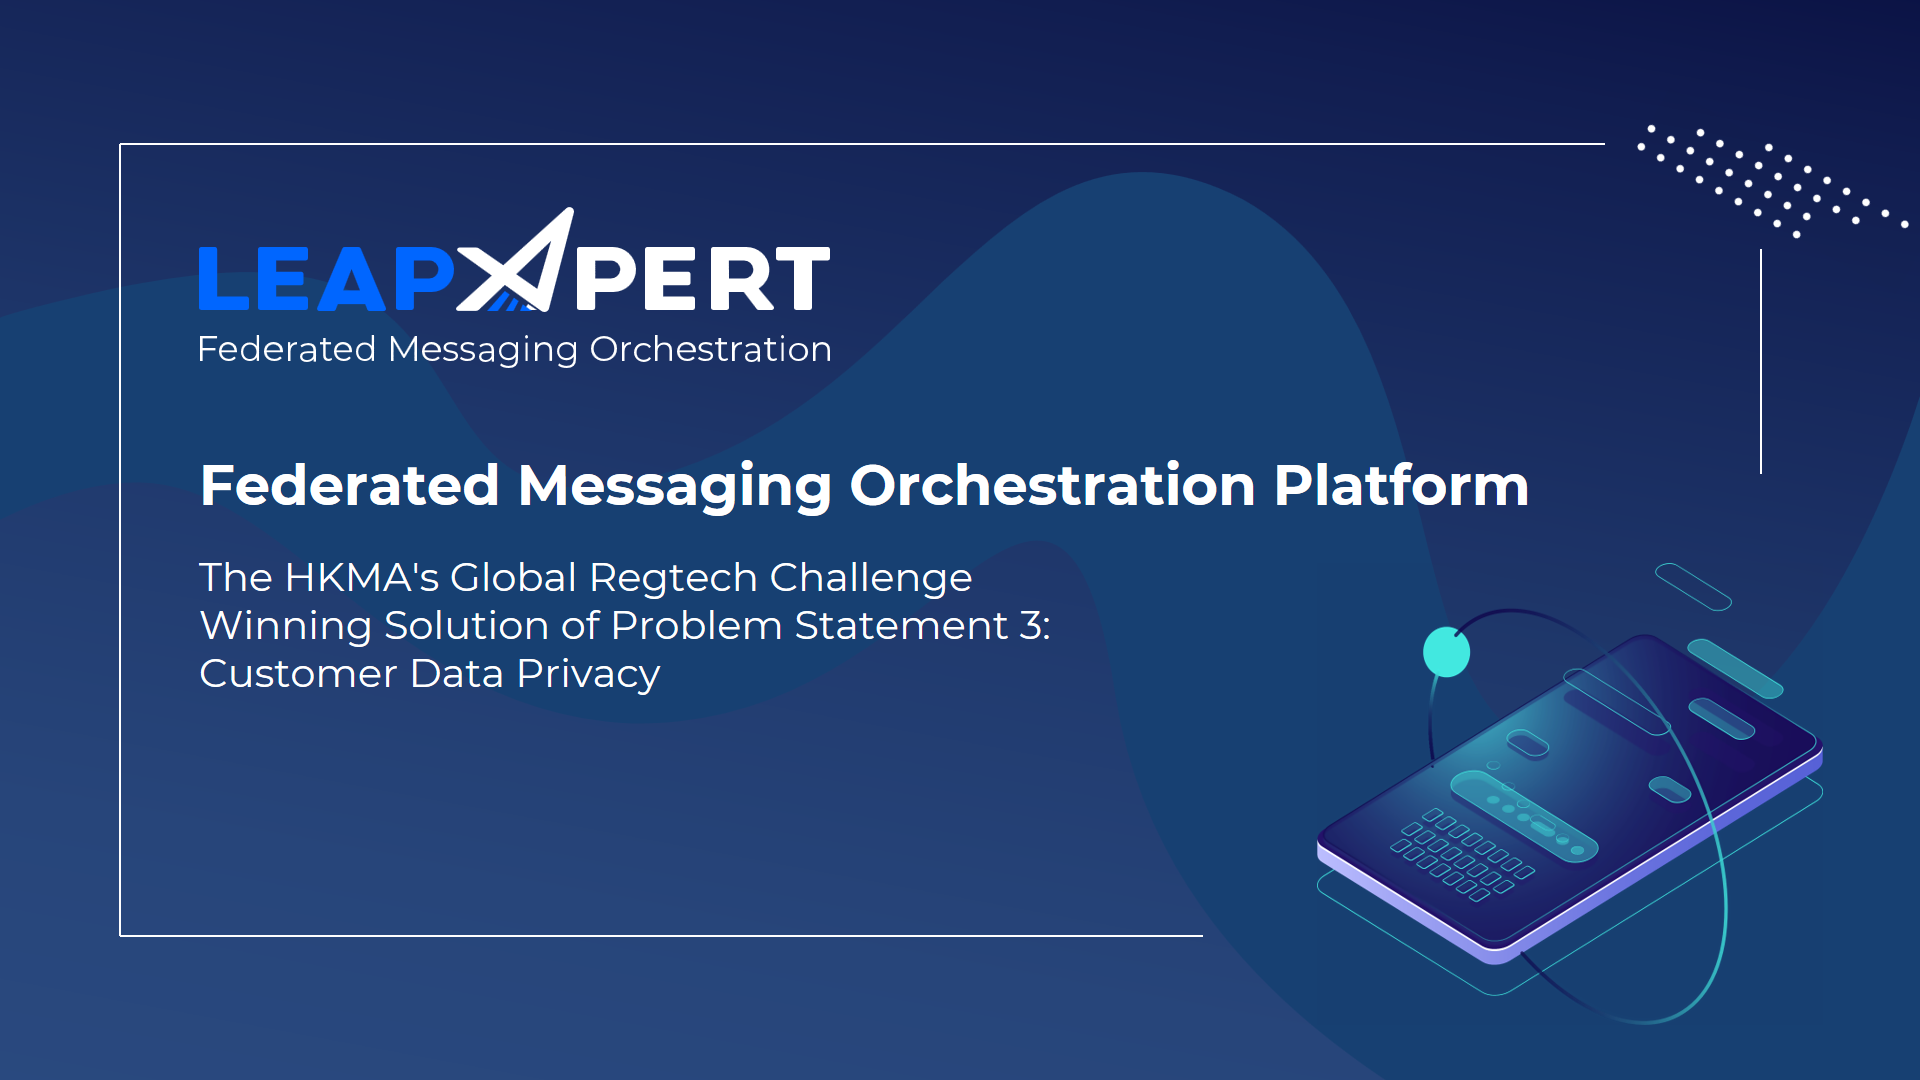 Federated Messaging Orchestration Platform | Global Regtech Challenge Winning Solution of Problem Statement 3: Customer Data Privacy